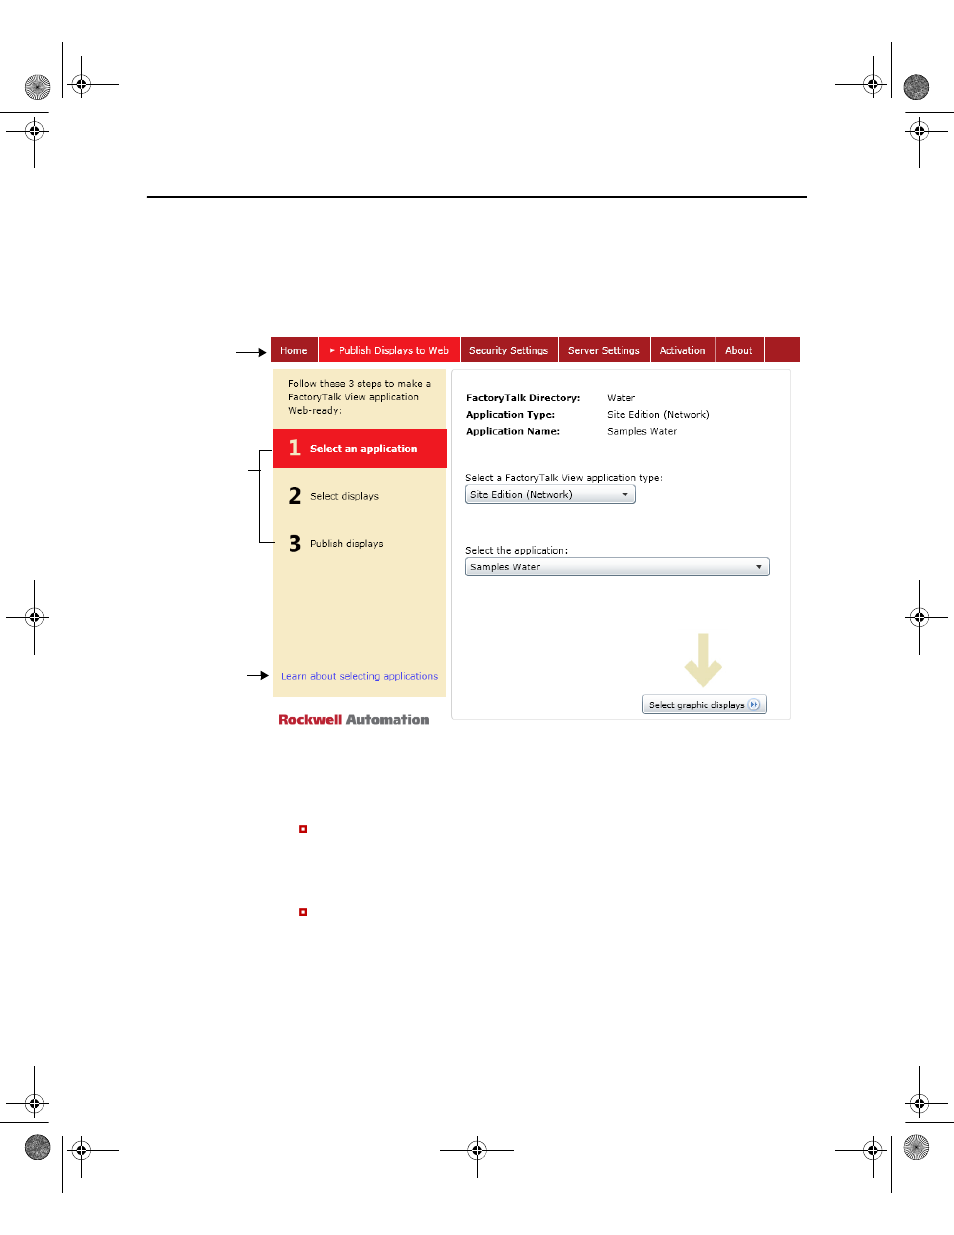 Creating a new site edition web application | Rockwell Automation FactoryTalk ViewPoint Quick Start Guide User Manual | Page 30 / 46